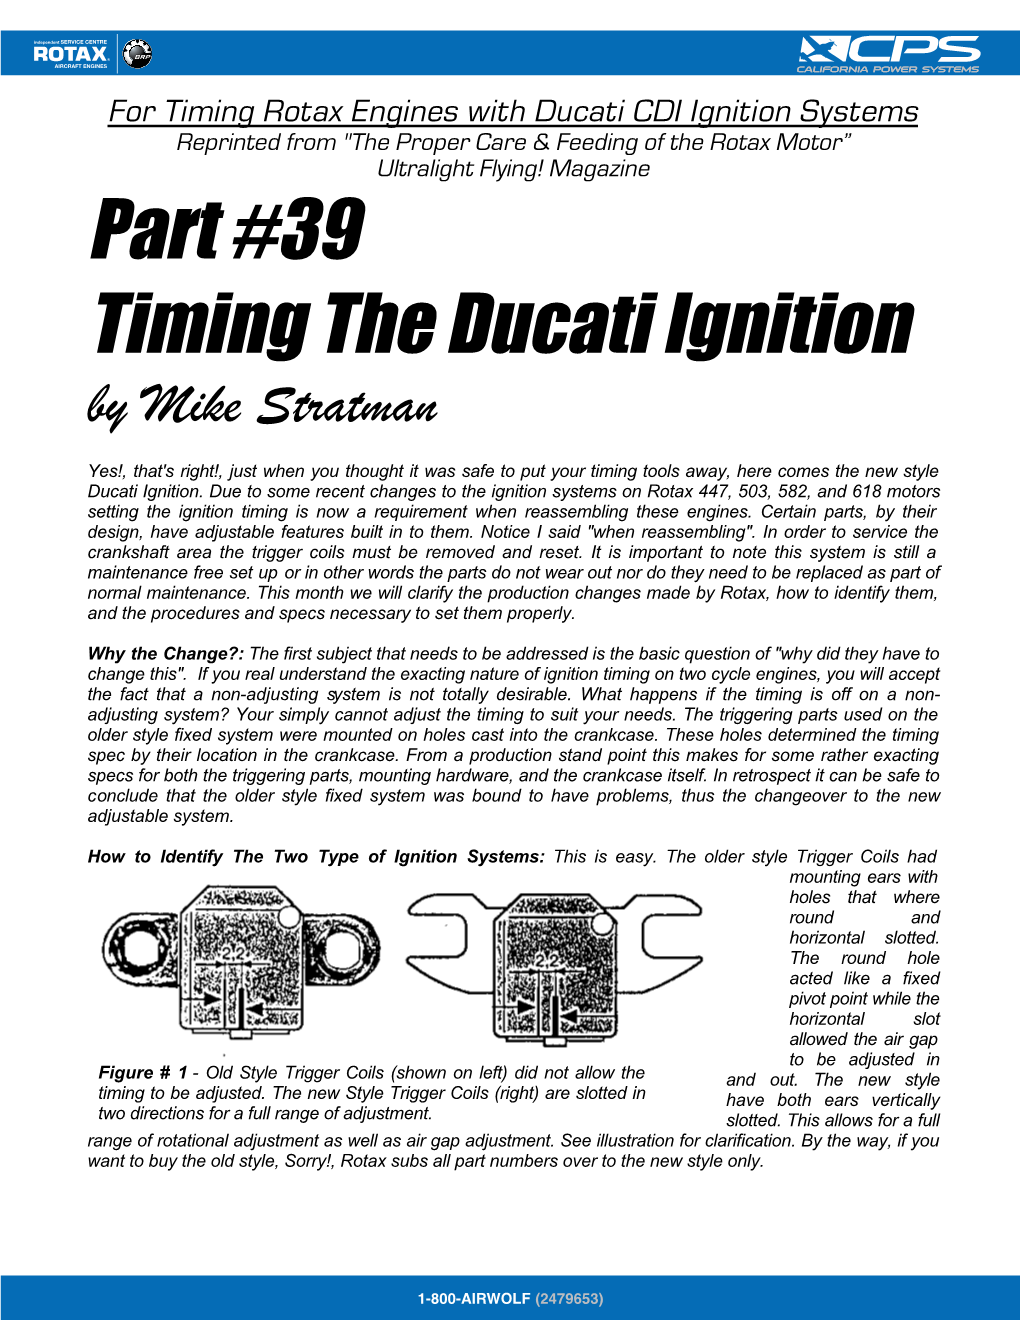 Part #39 Timing the Ducati Ignition by Mike Stratman